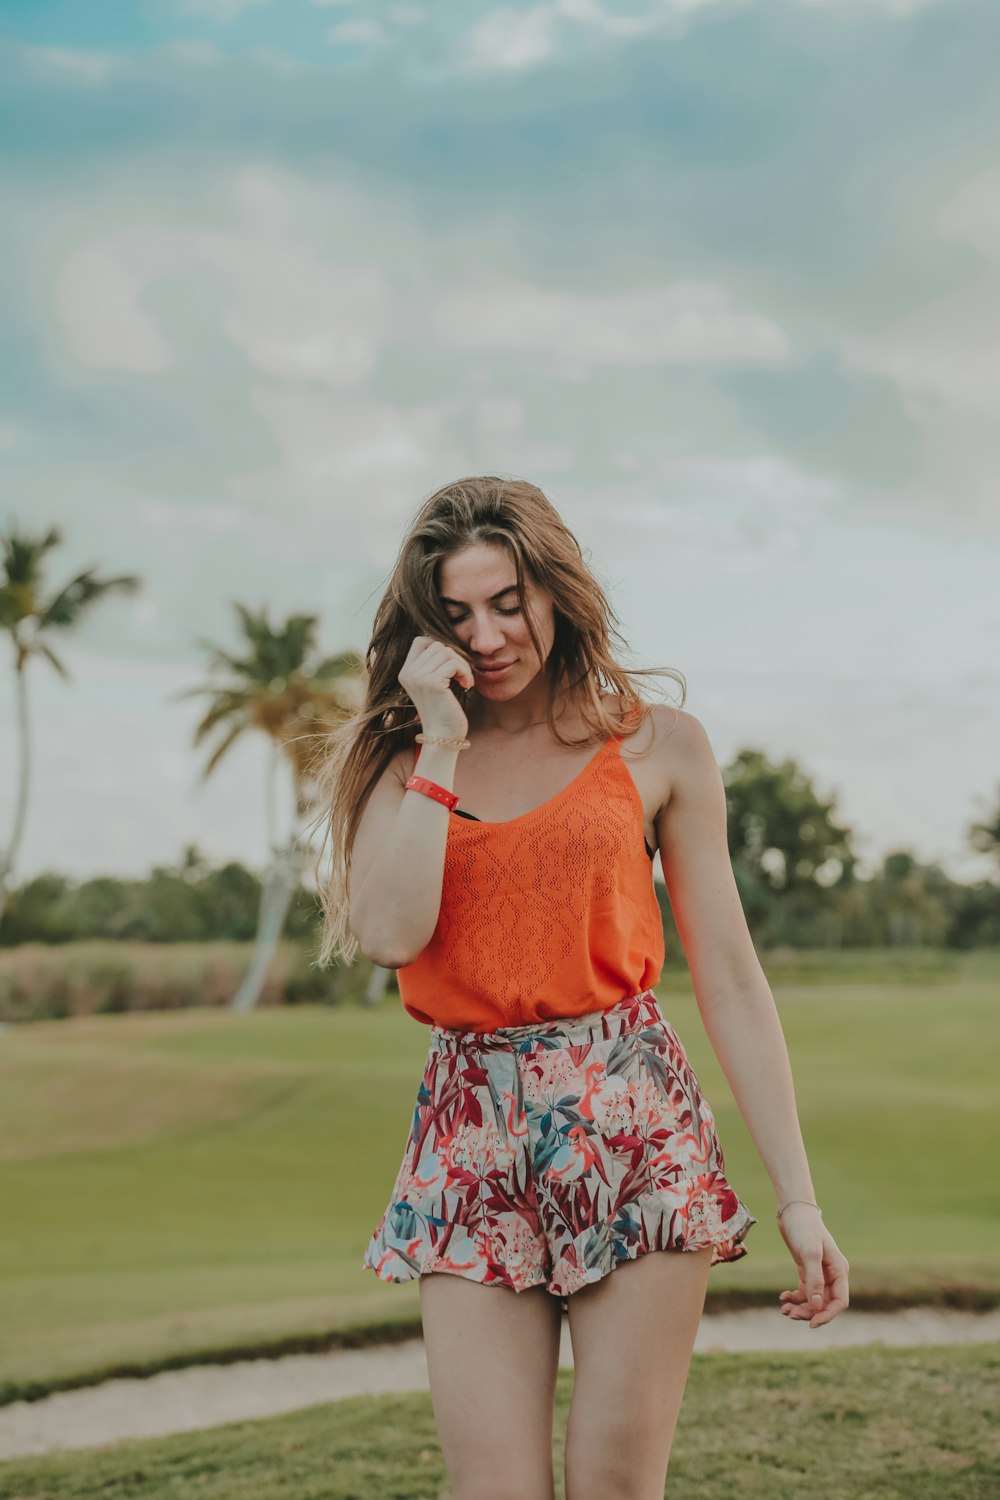 woman in red tank top and white floral skirt standing on green grass field during daytime